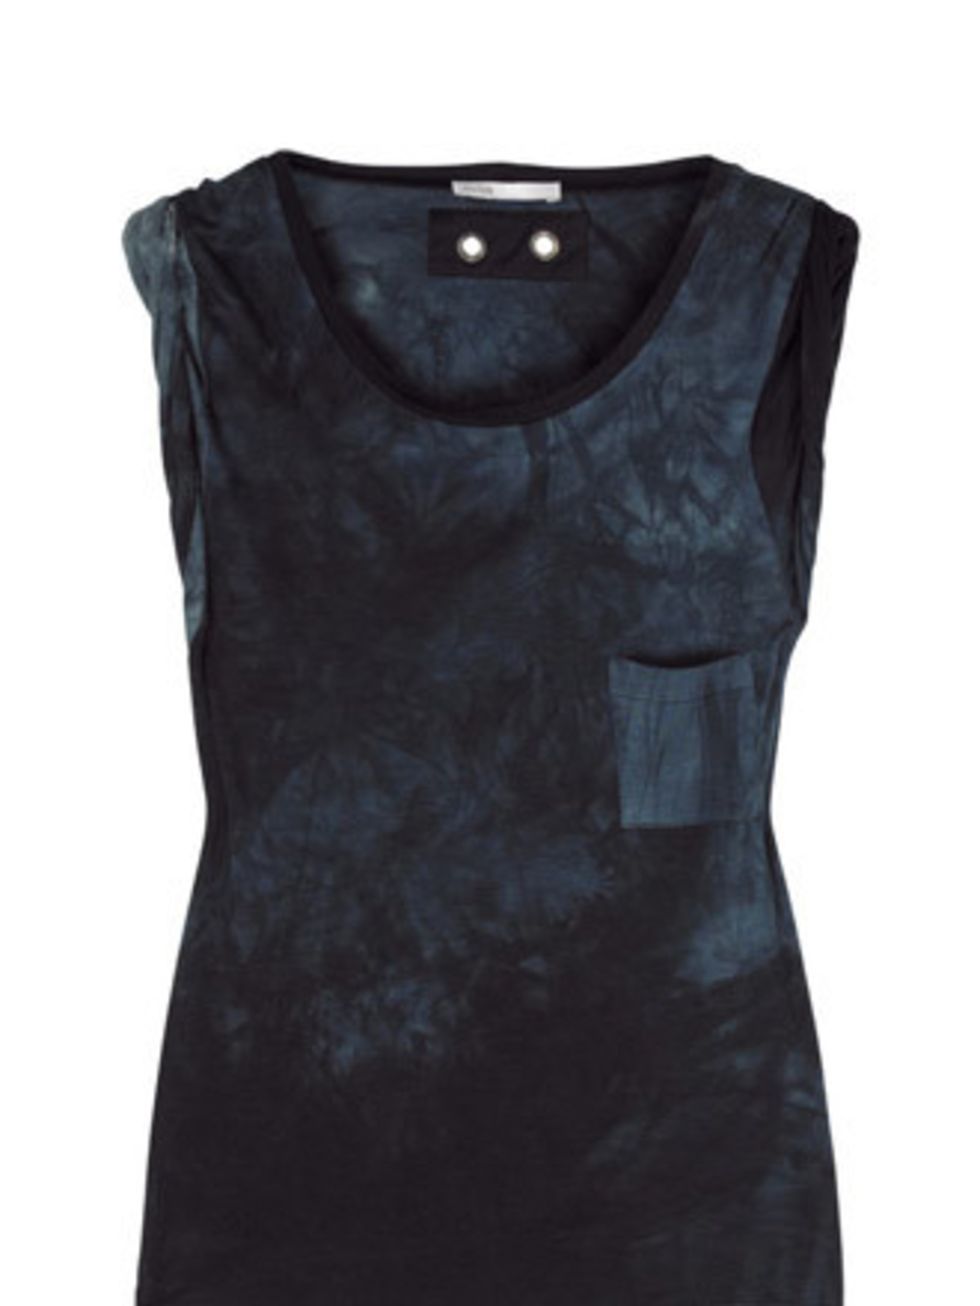 <p>Summer isn't all about soft pastels and pretty florals, you know. Sometimes you want something a bit more edgy. This tie-dye tank from Maje will look tough paired with skinny jeans, killer heels and sunnies.</p><p>T-Shirt, £78 by Maje at <a href="http: